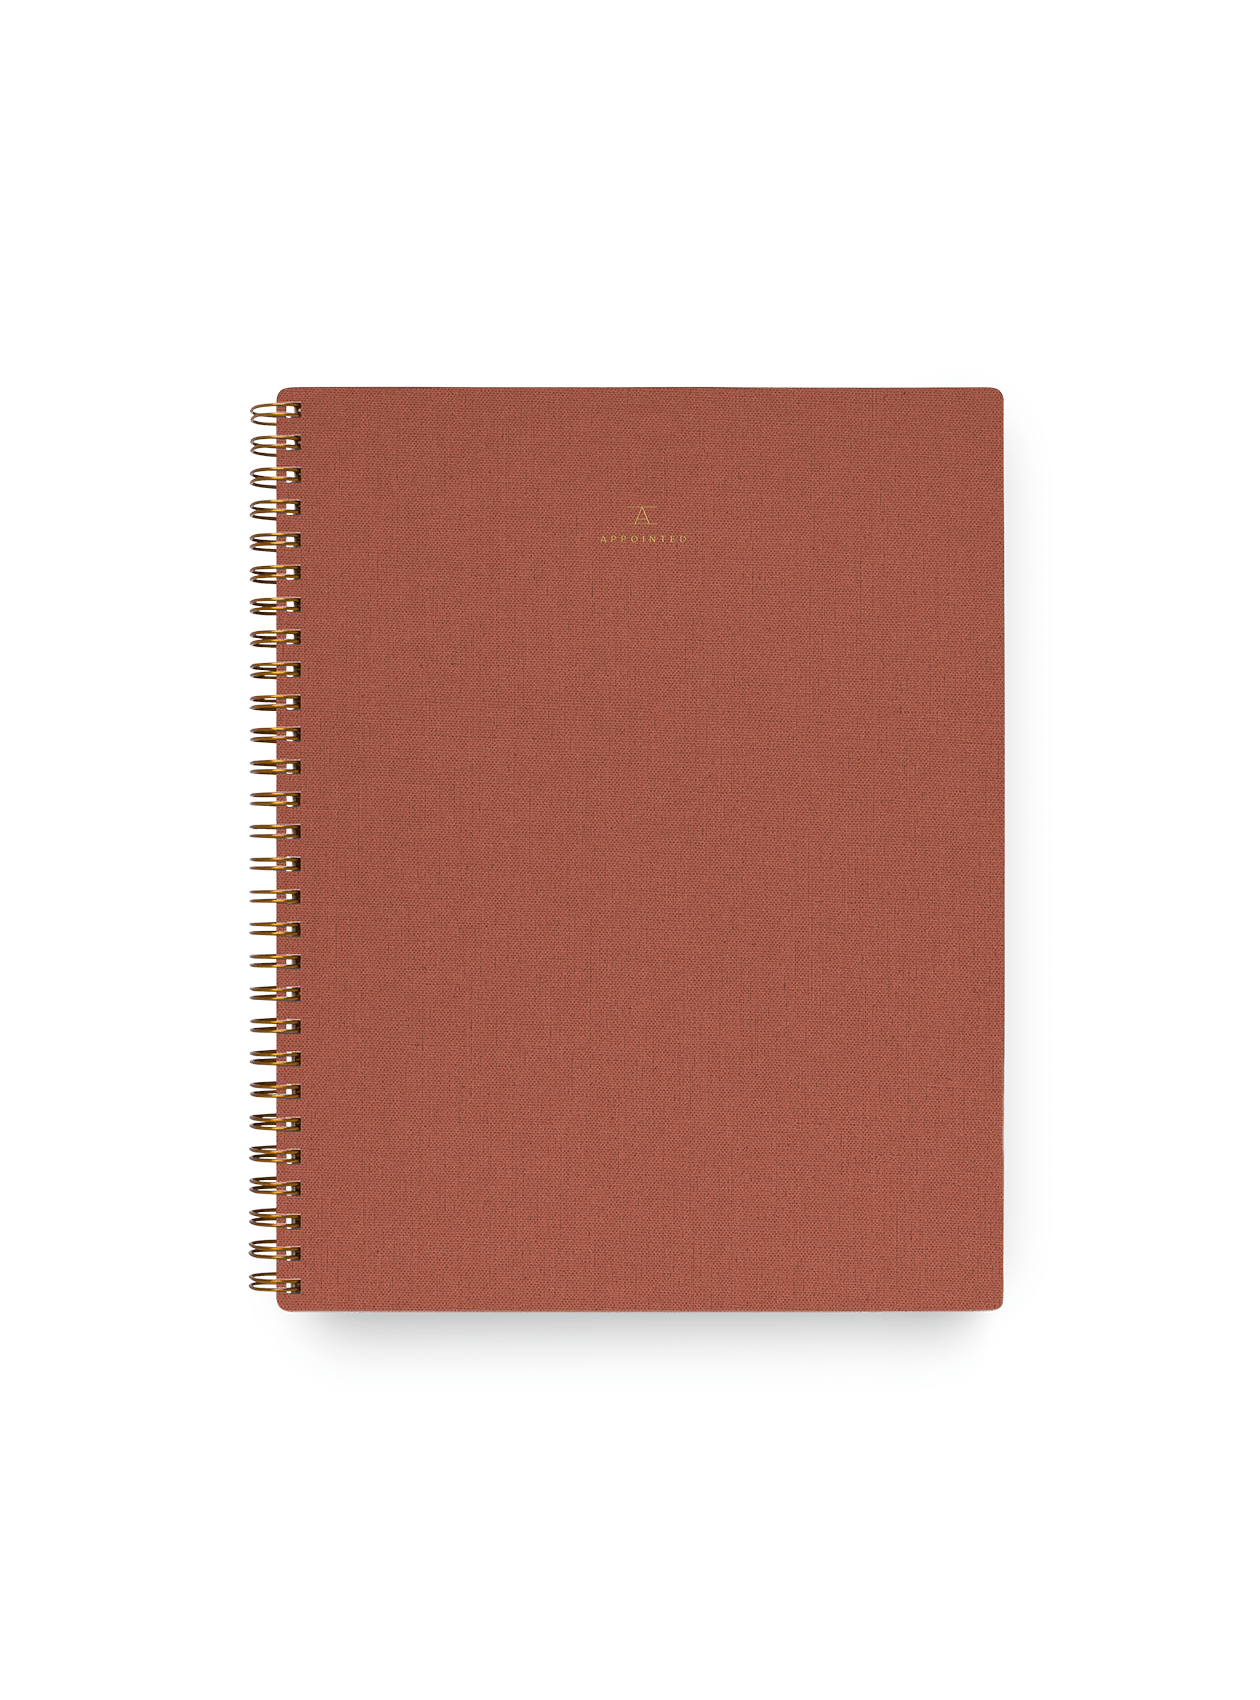 The Appointed Notebook in Sienna with bookcloth covers, gold foil stamped details, and wire-o binding || Sienna